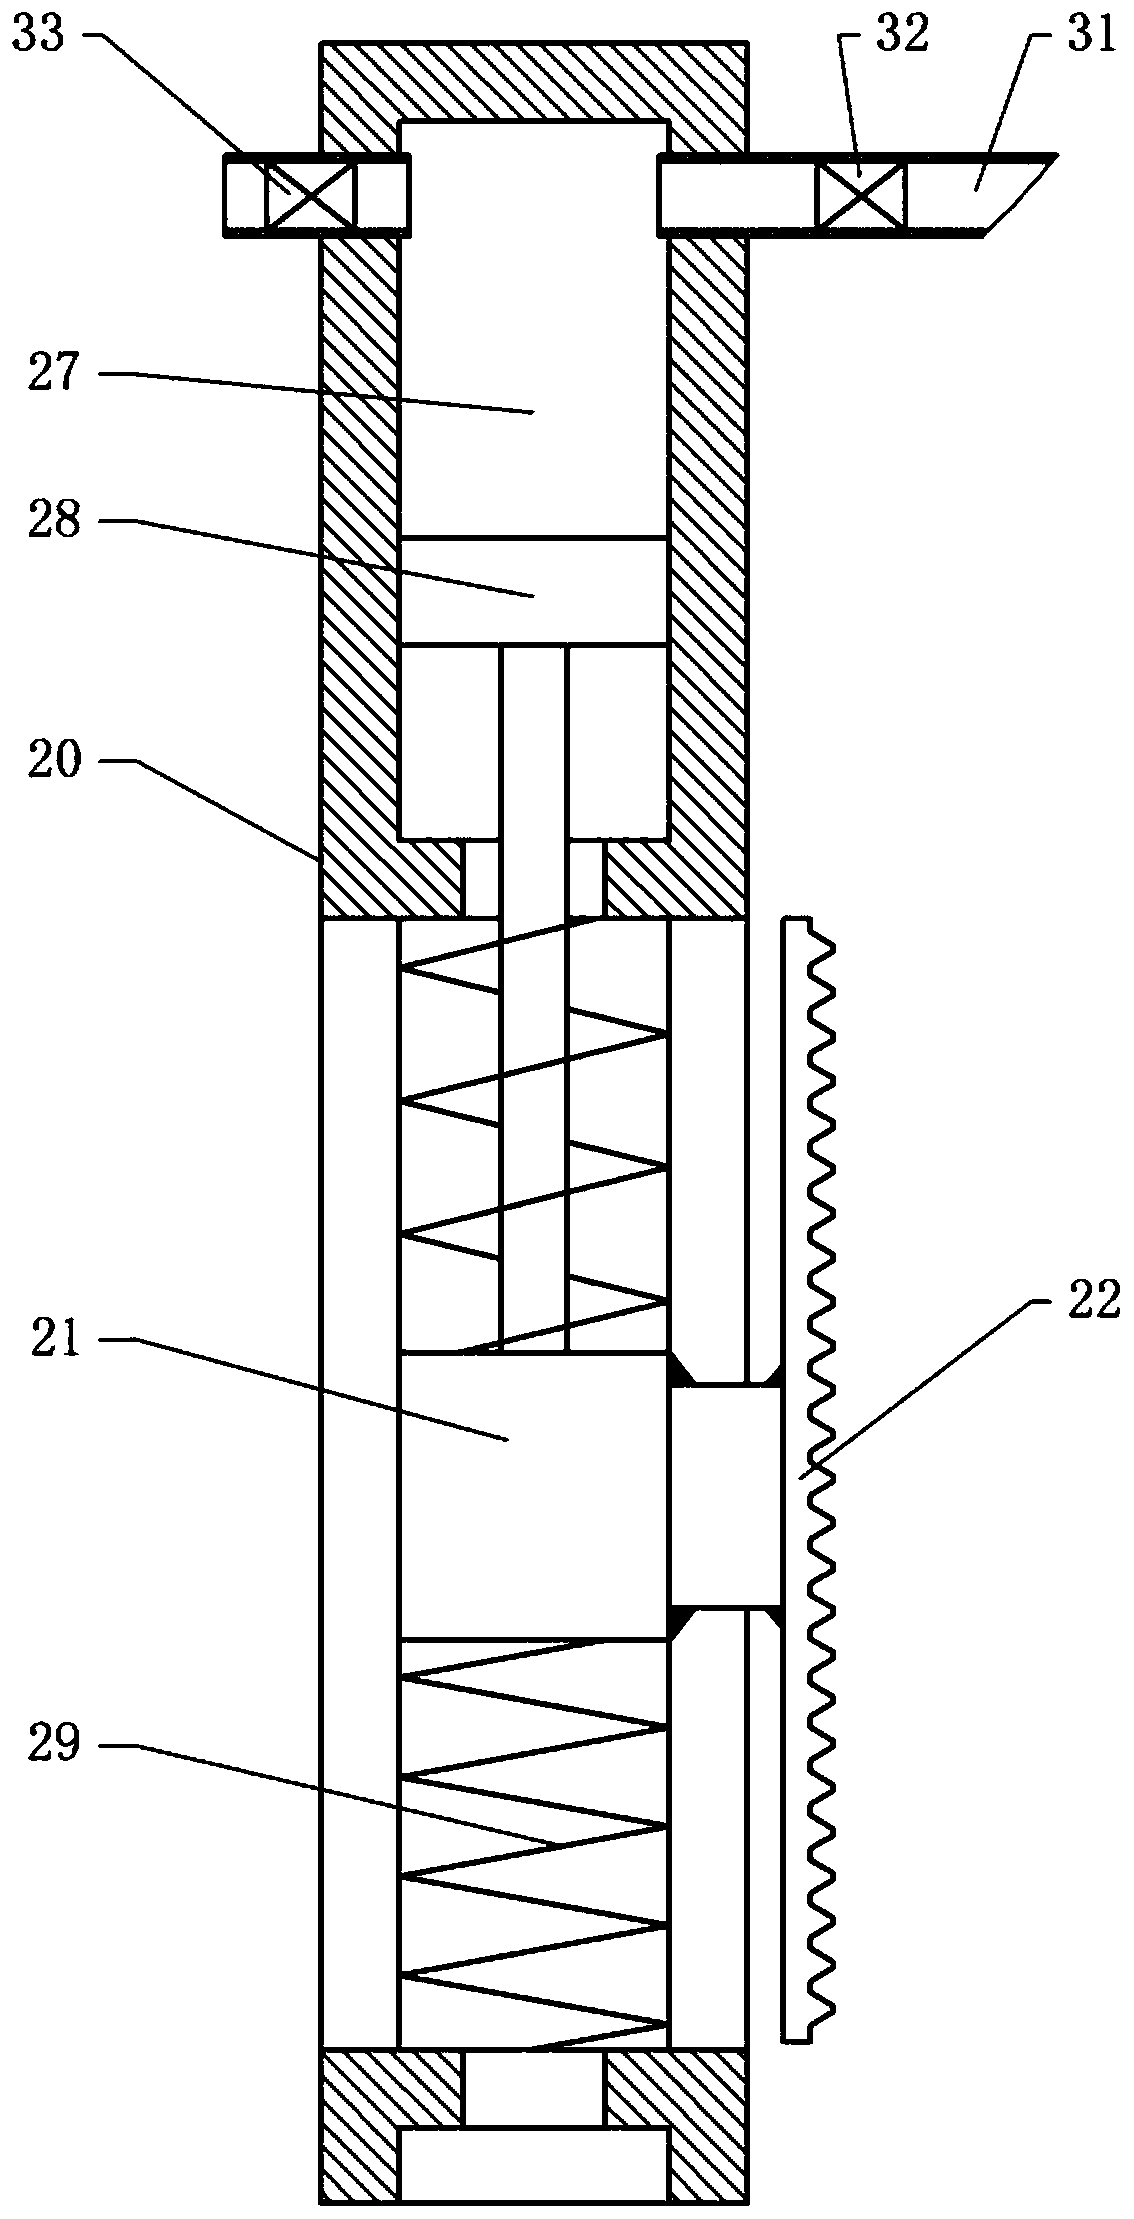 Monitoring device for elevators